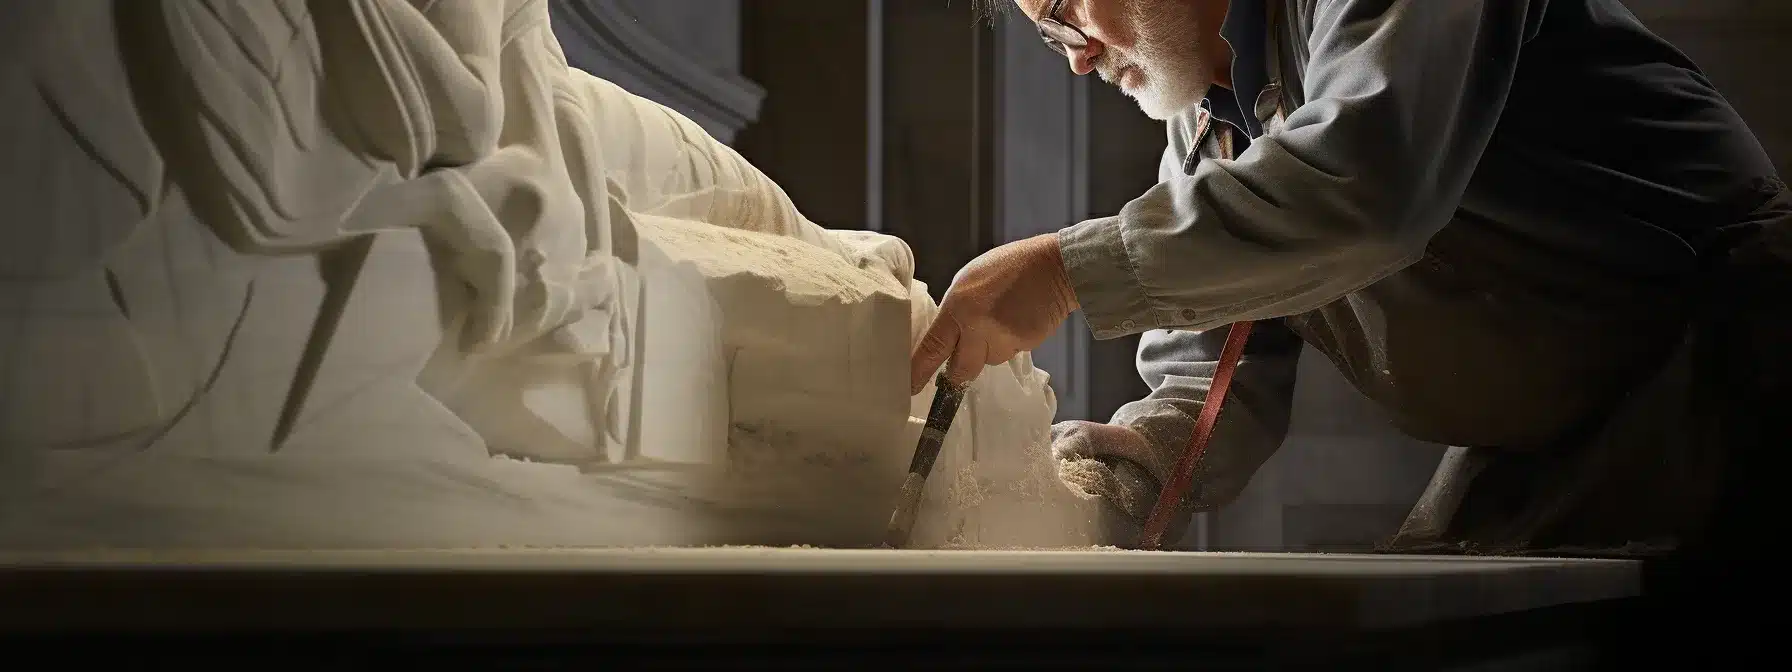 A Sculptor Chiseling Away At A Piece Of Marble, Shaping It Into A New Form.